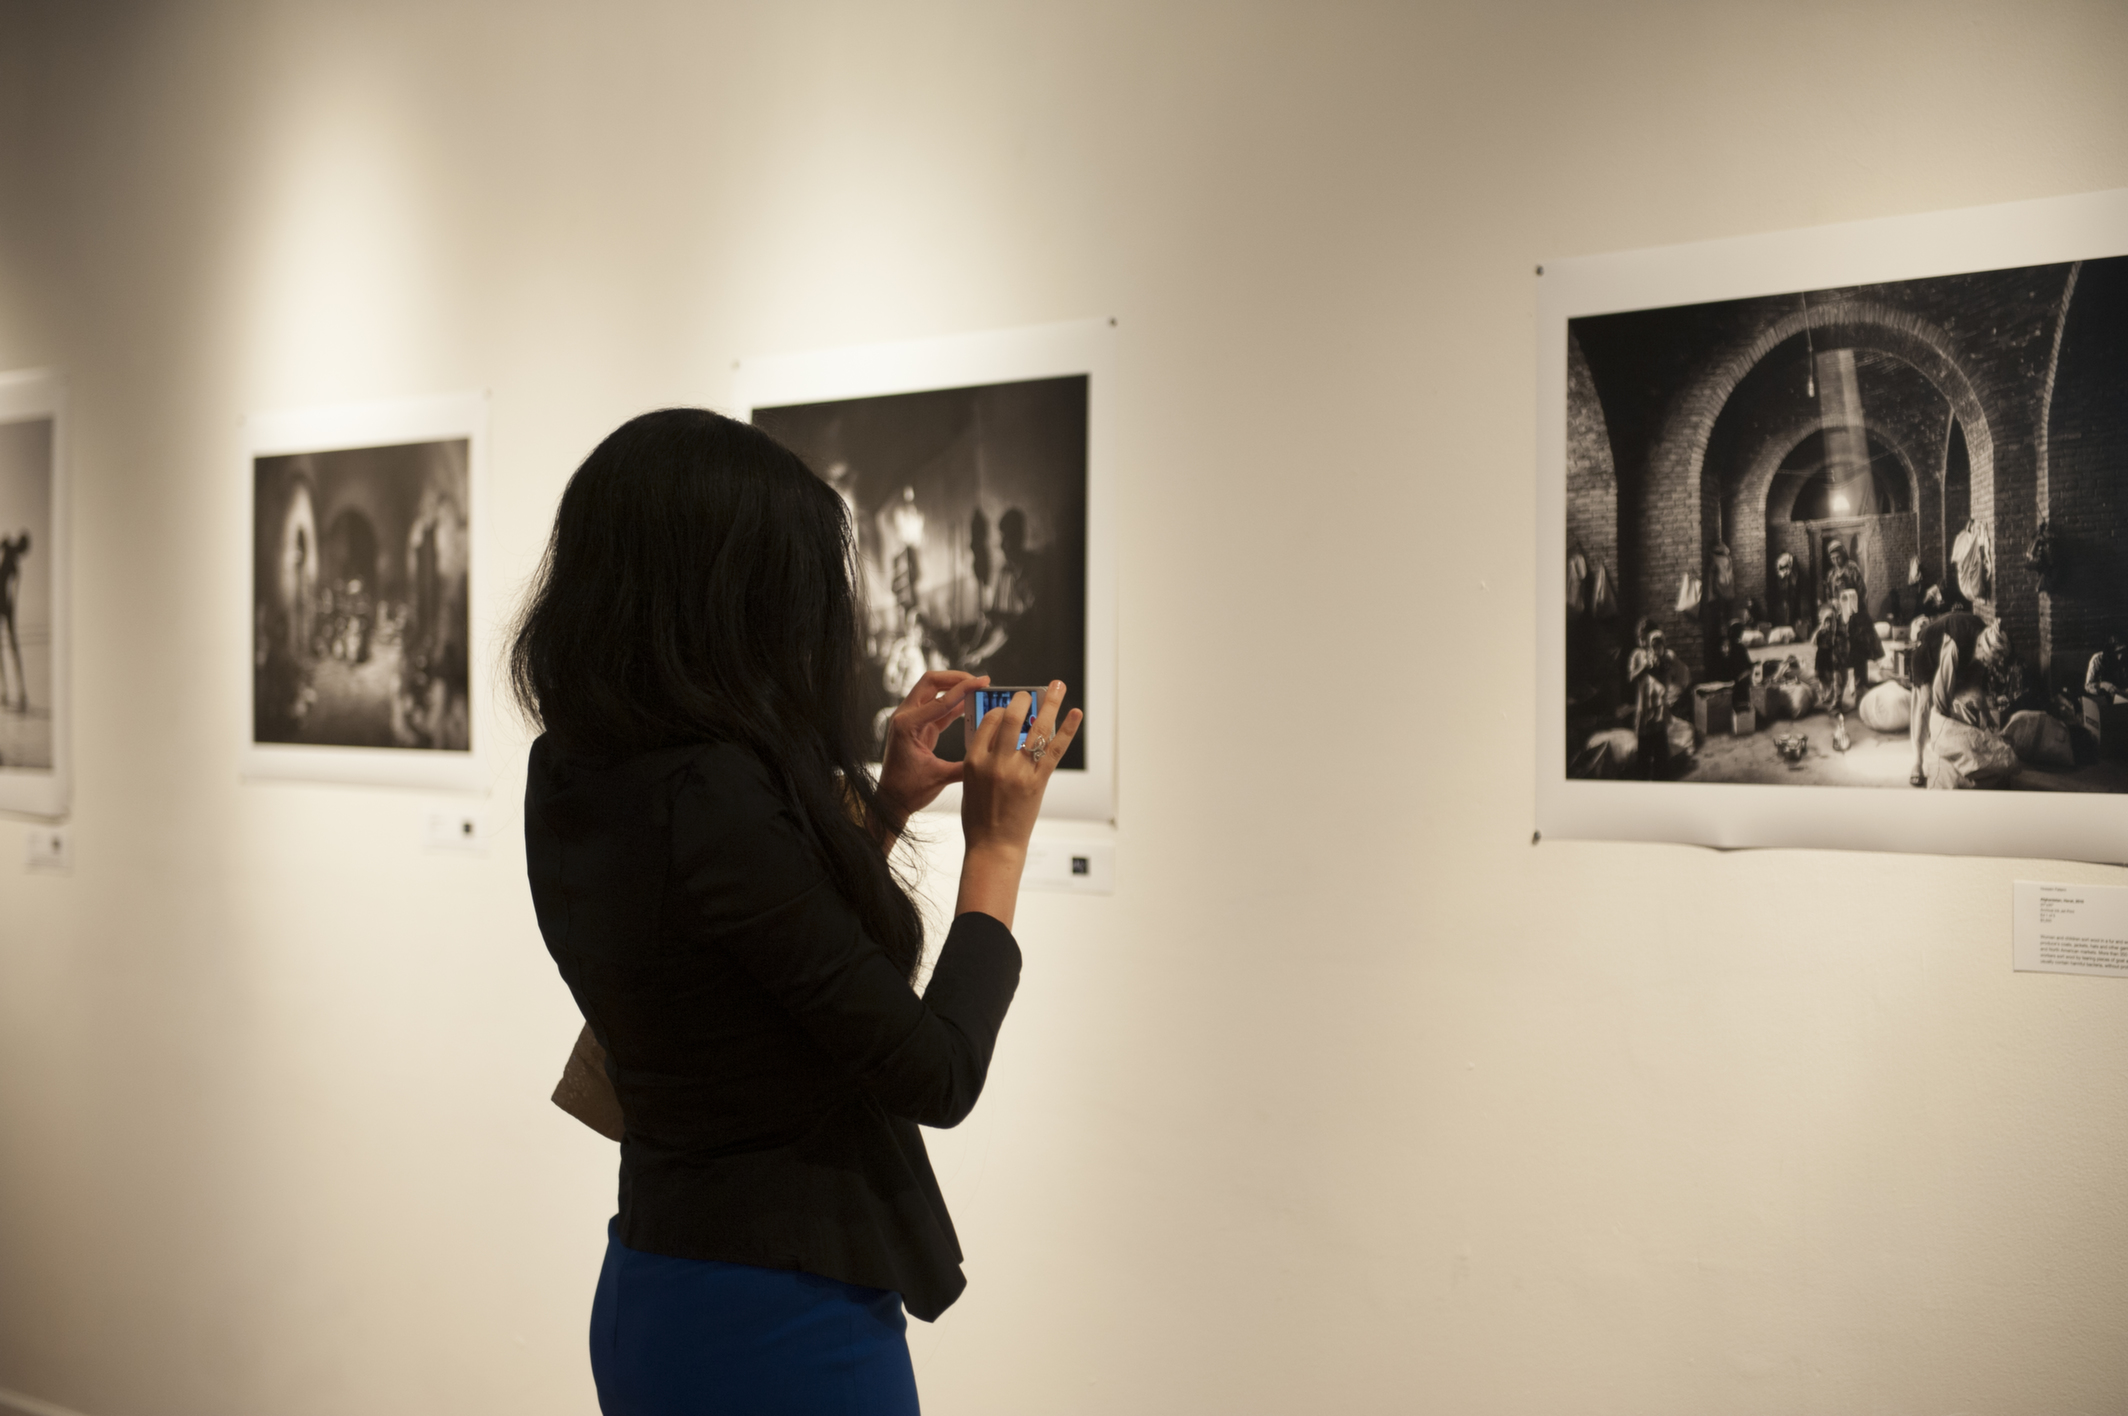 Over 100 in Attendance at “Under the Surface: A Photographic Portrait of the Middle East”